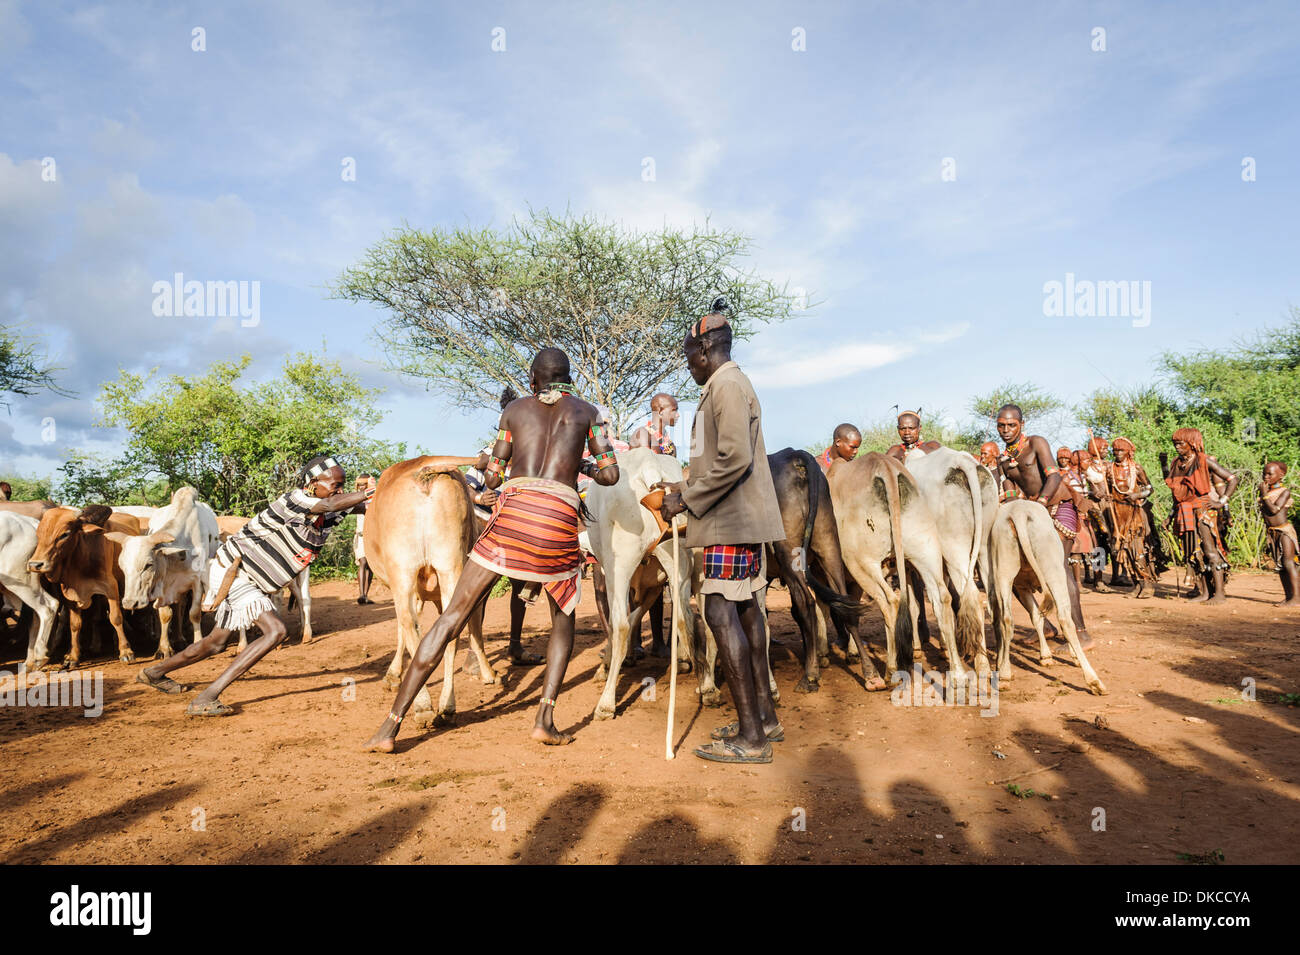 Gathering the cattle for a bull jumping ceremony. A rite of passage from boys to men. Hamer tribe, Omo valley, Ethiopia Stock Photo